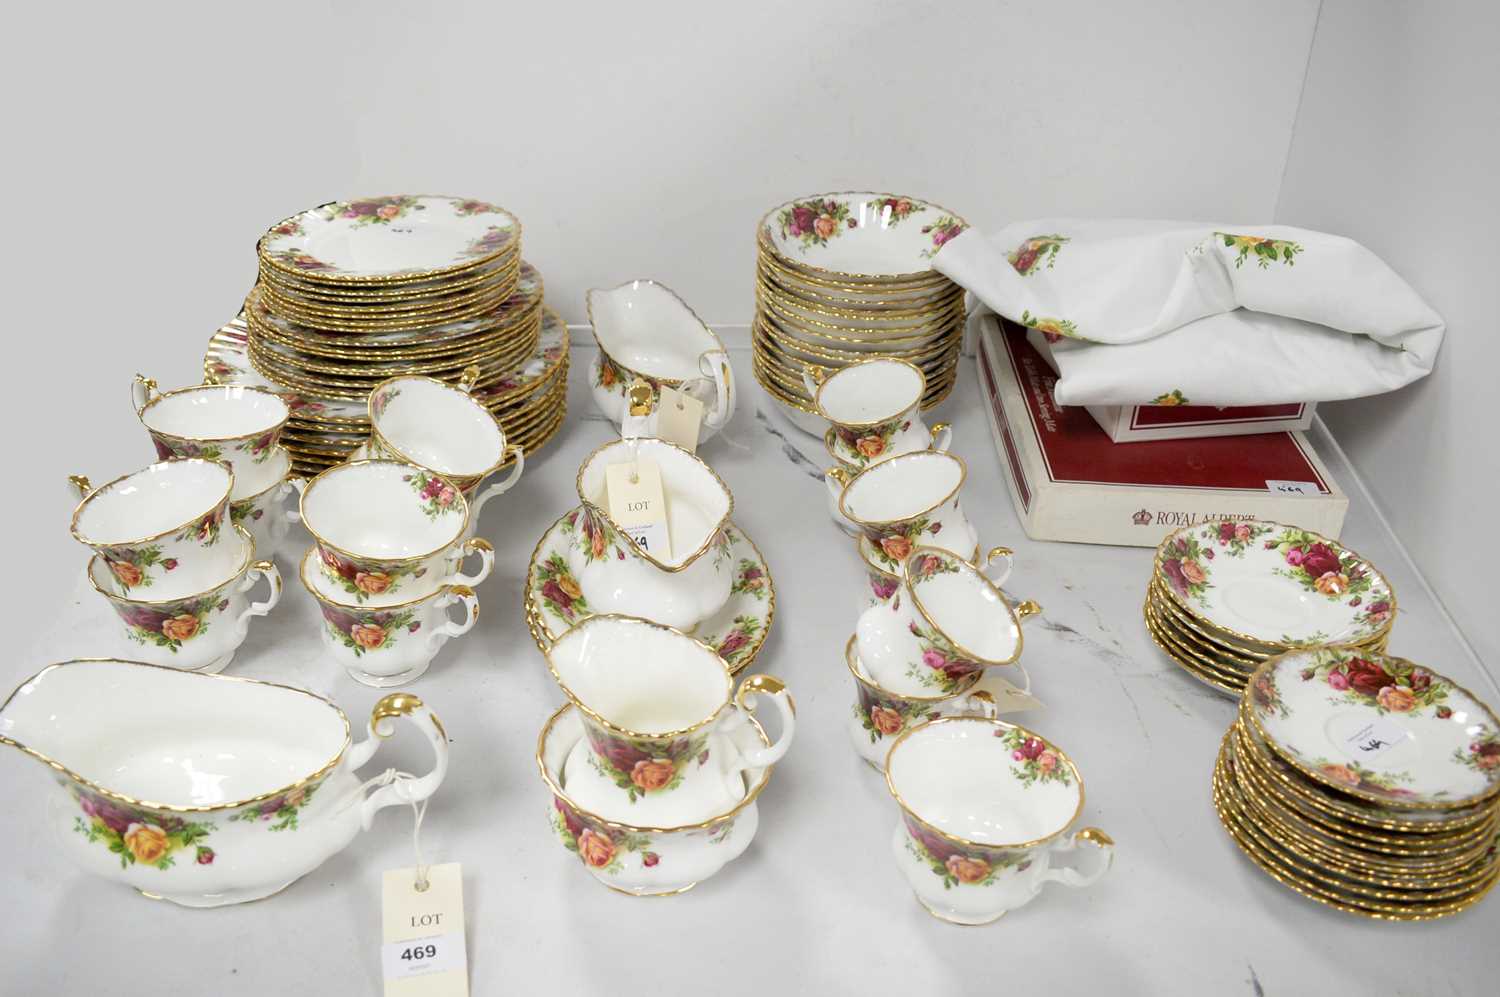 Lot 469 - Royal Albert 'Old Country Roses' tea and dinner service